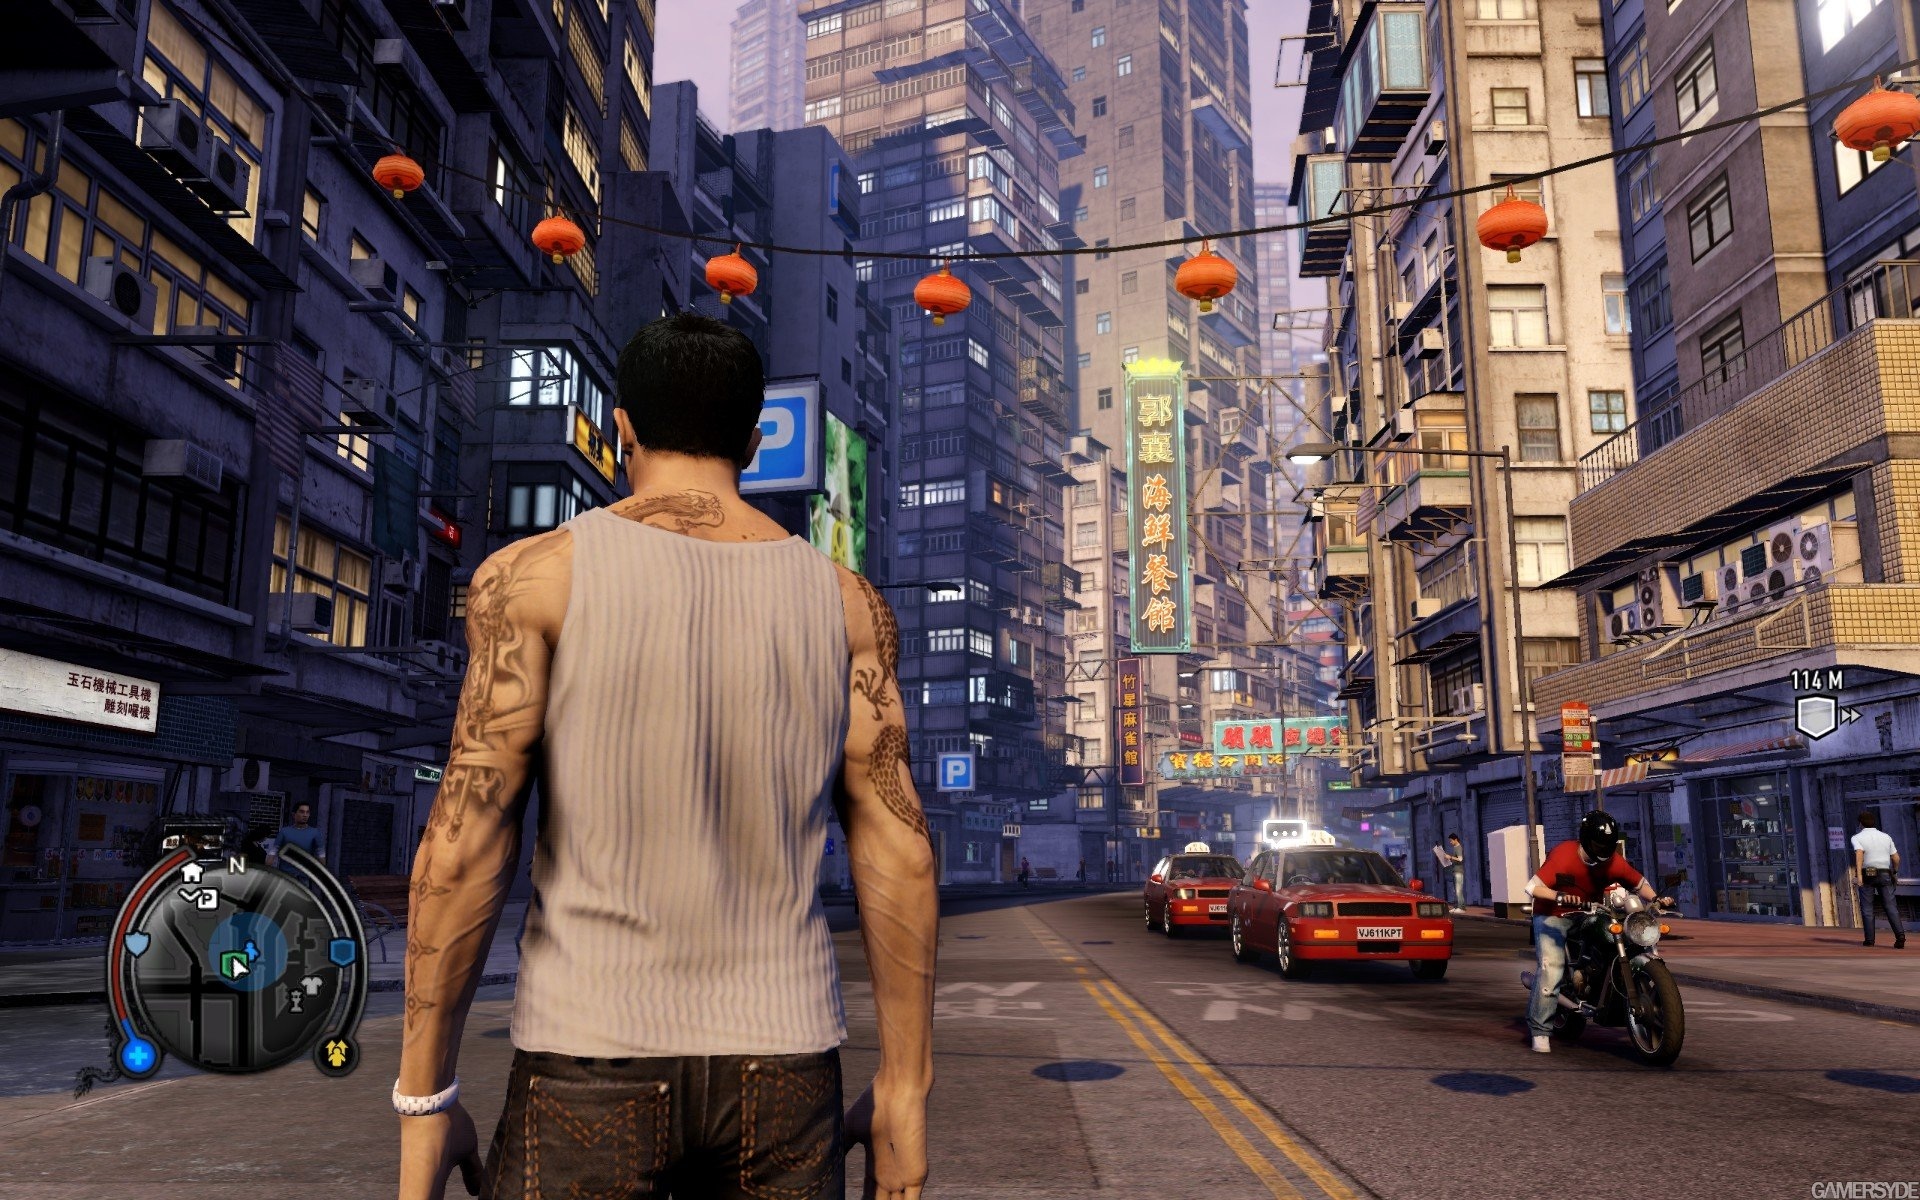 android sleeping dogs